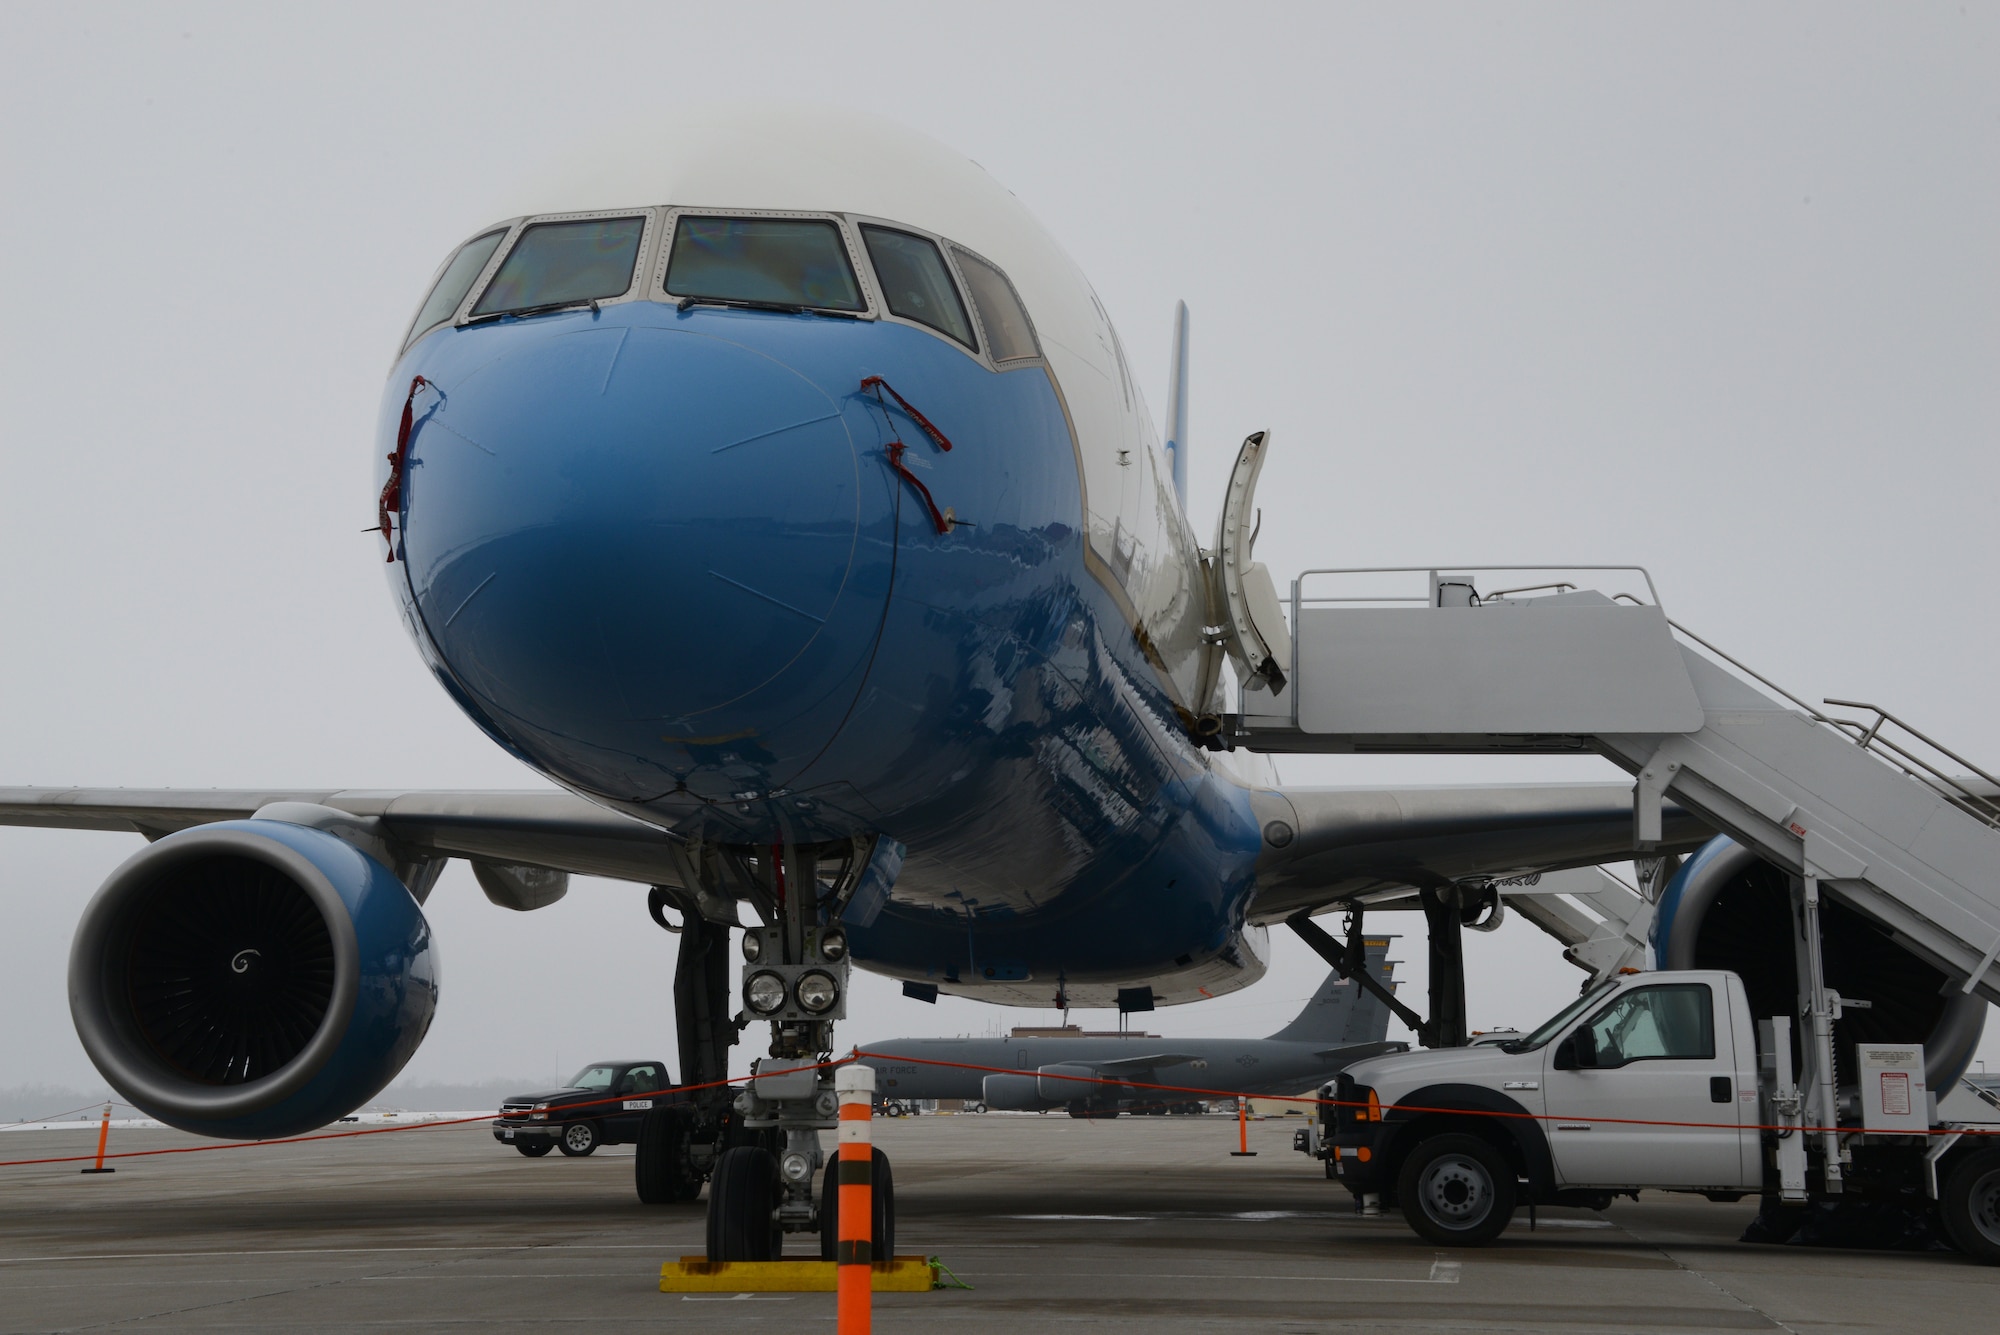 U.S. Air Force C-32 call sign “Air Force Two” on the ramp at the Iowa Air National Guard in Sioux City, Iowa on January 30, 2020